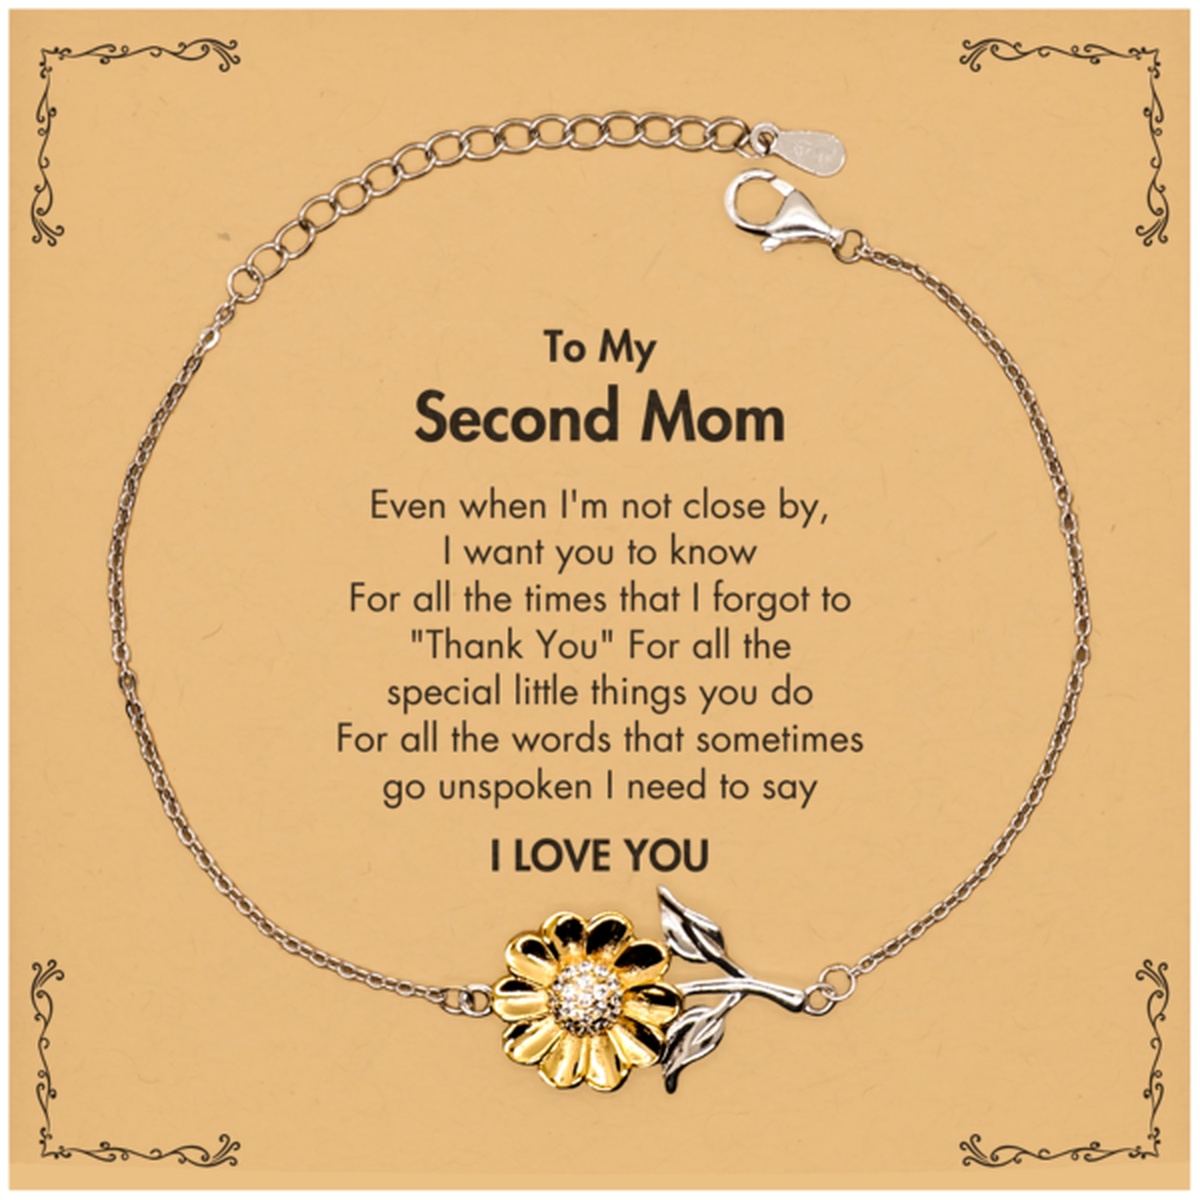 Thank You Gifts for Second Mom, Keepsake Sunflower Bracelet Gifts for Second Mom Birthday Mother's day Father's Day Second Mom For all the words That sometimes go unspoken I need to say I LOVE YOU